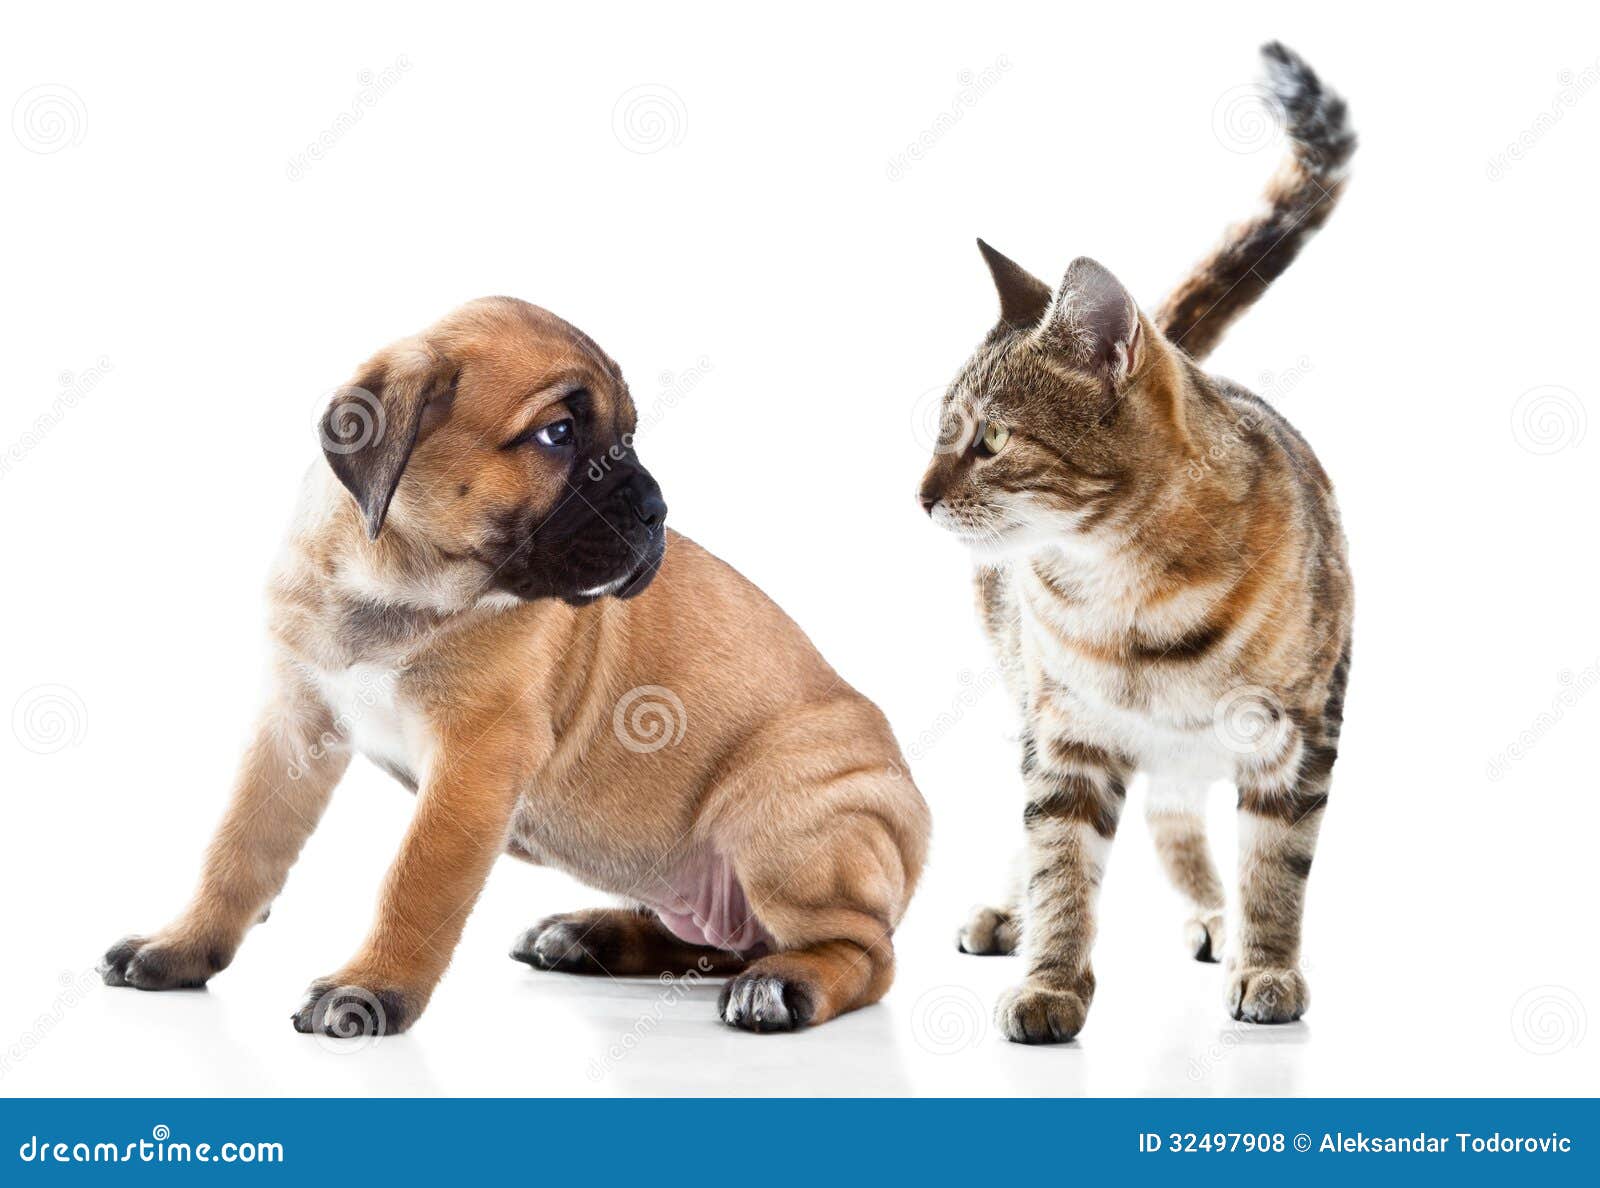 cane corso italiano puppy and kitten breeds bengal cat